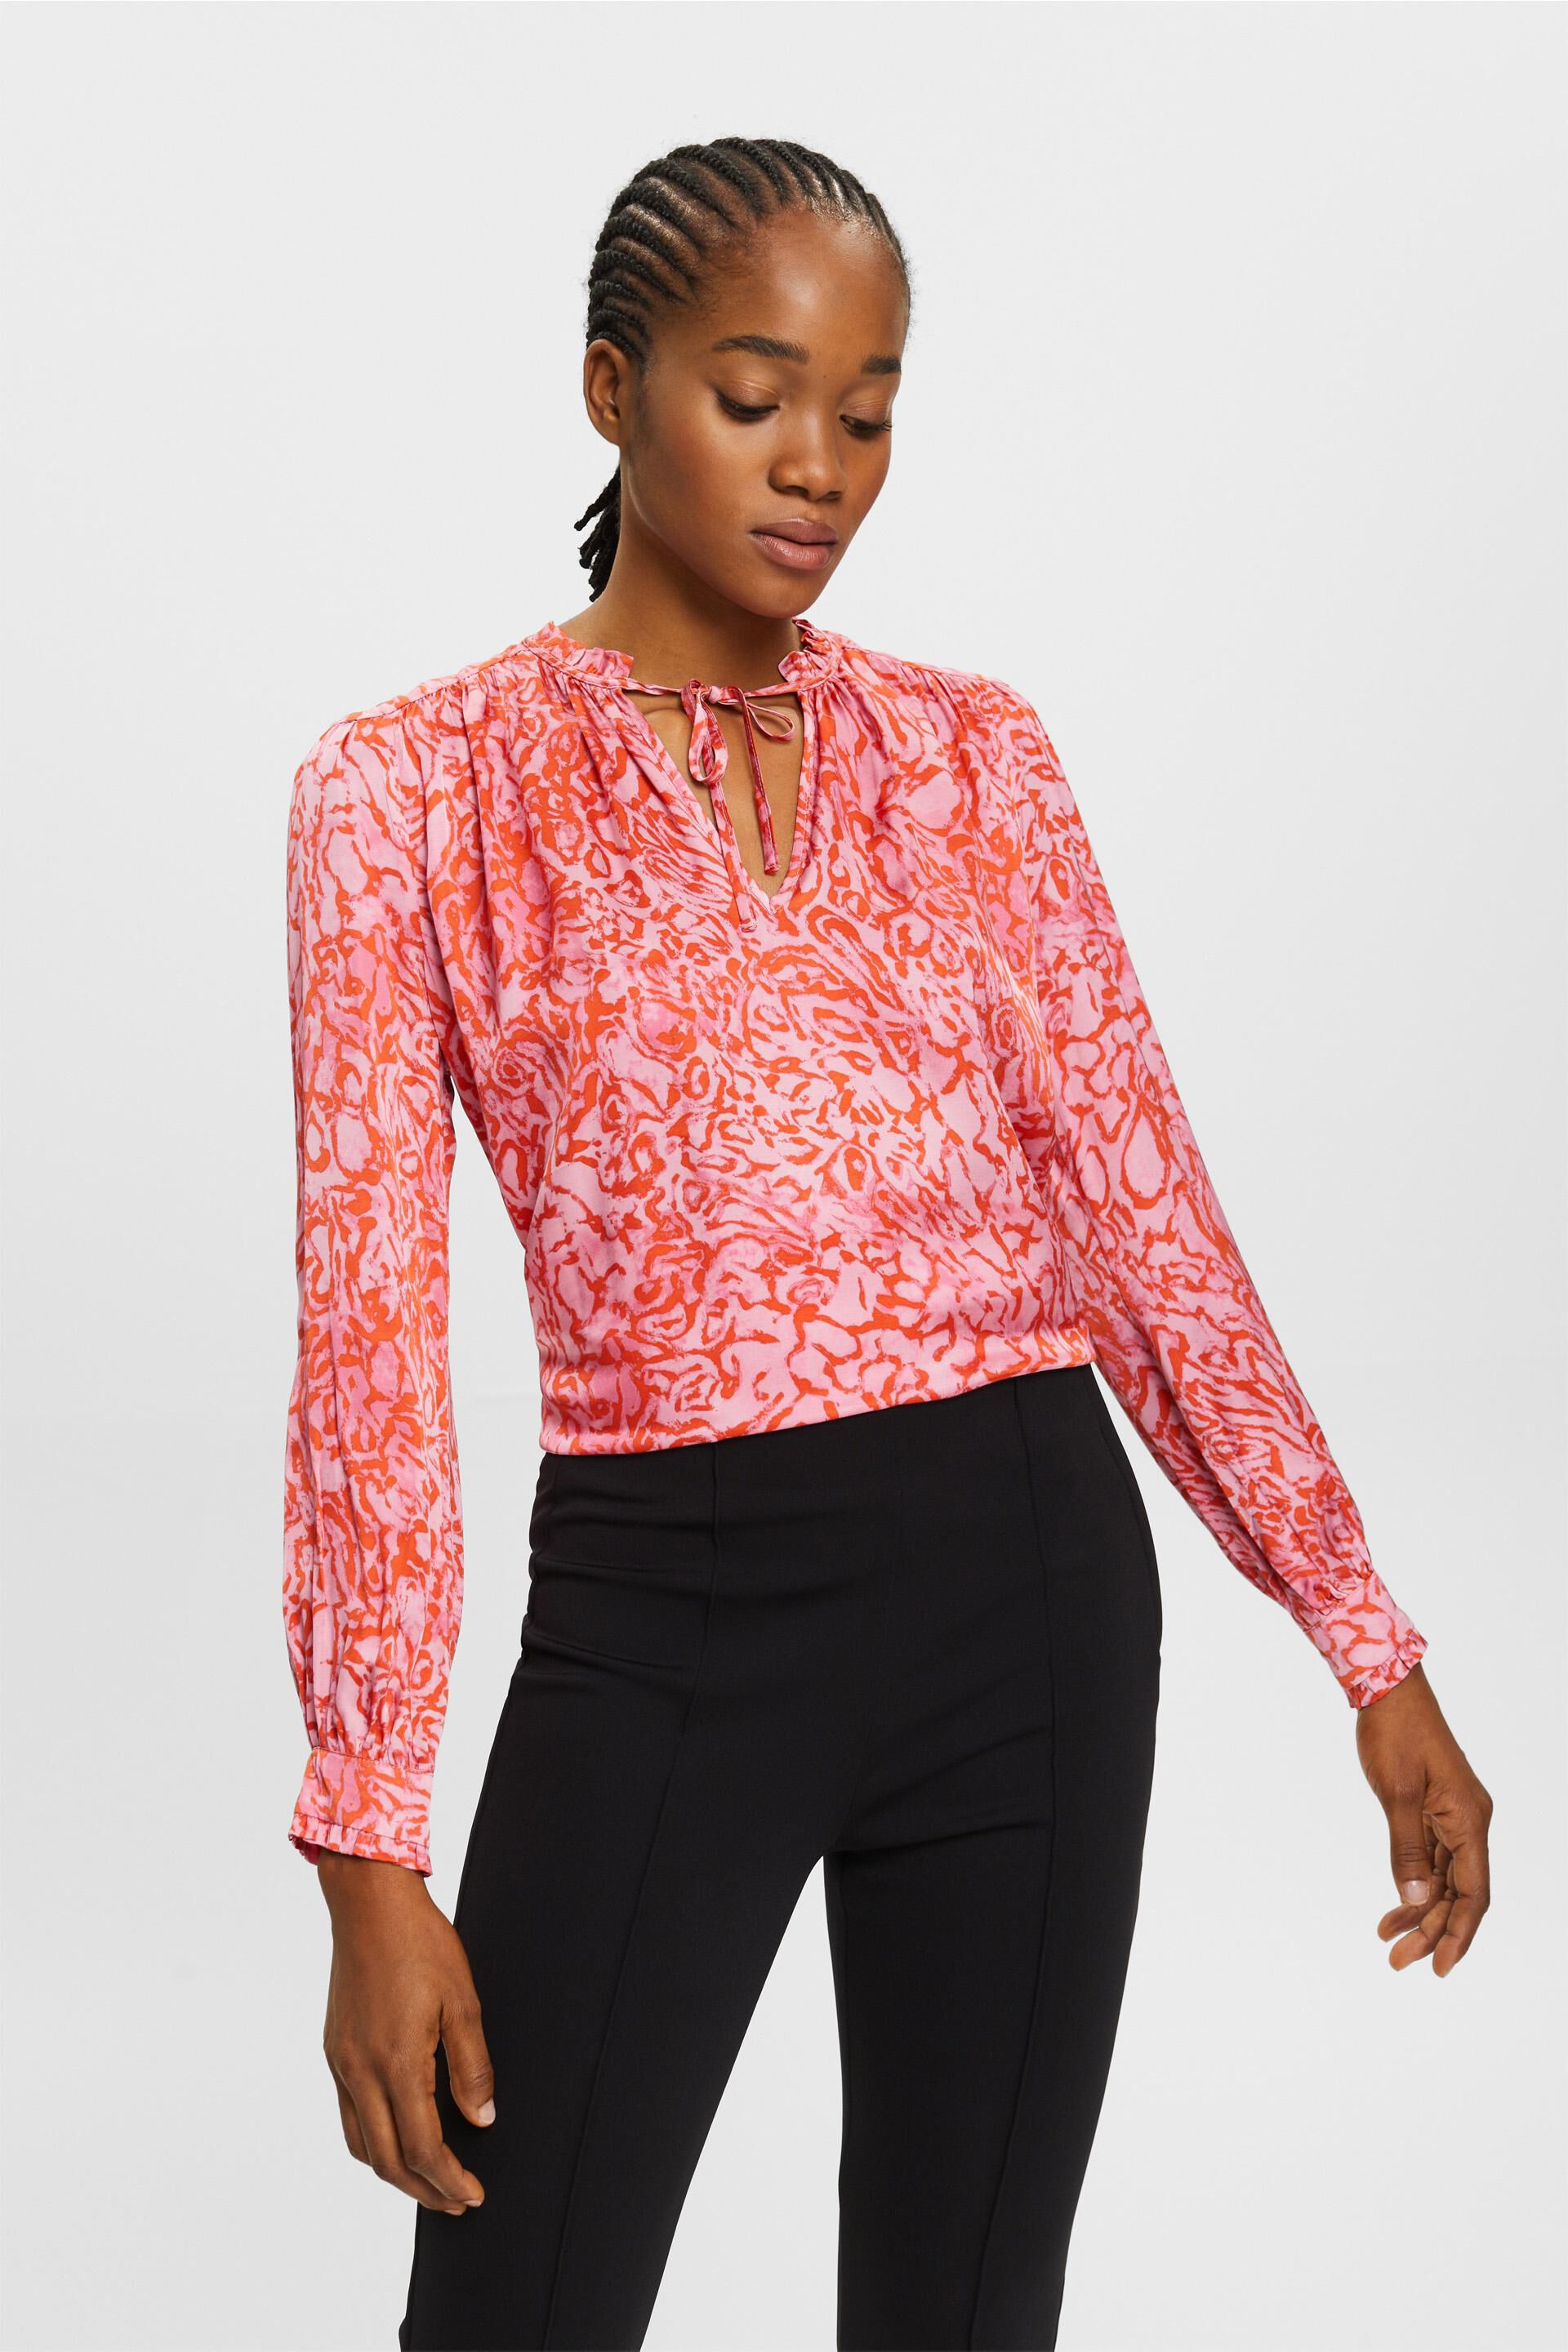 ESPRIT - Patterned satin blouse with ruffled edges at our online shop